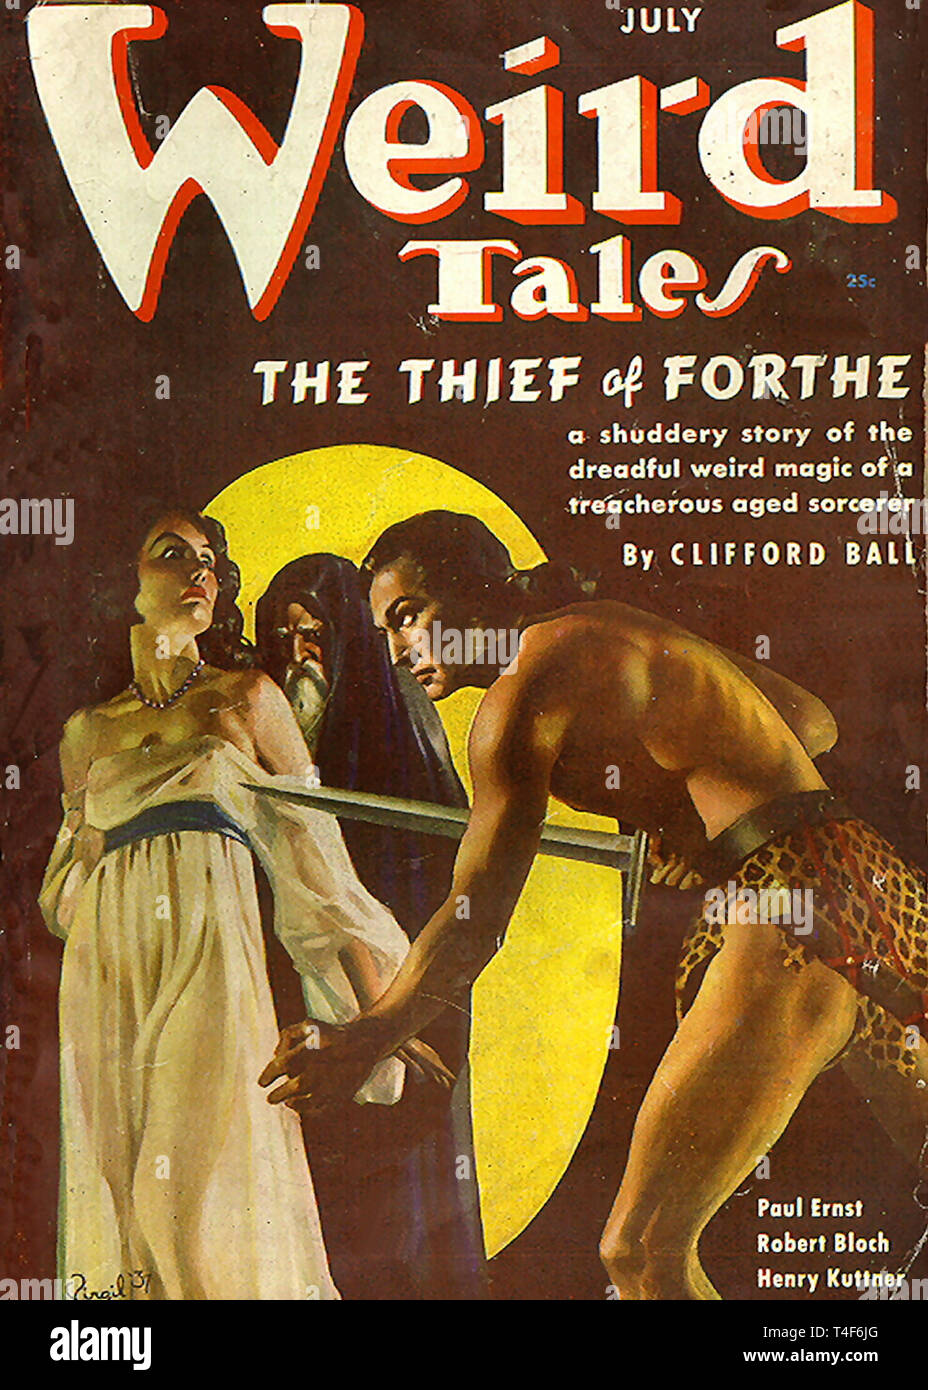 Weird Tales July 1937. Stock Photo